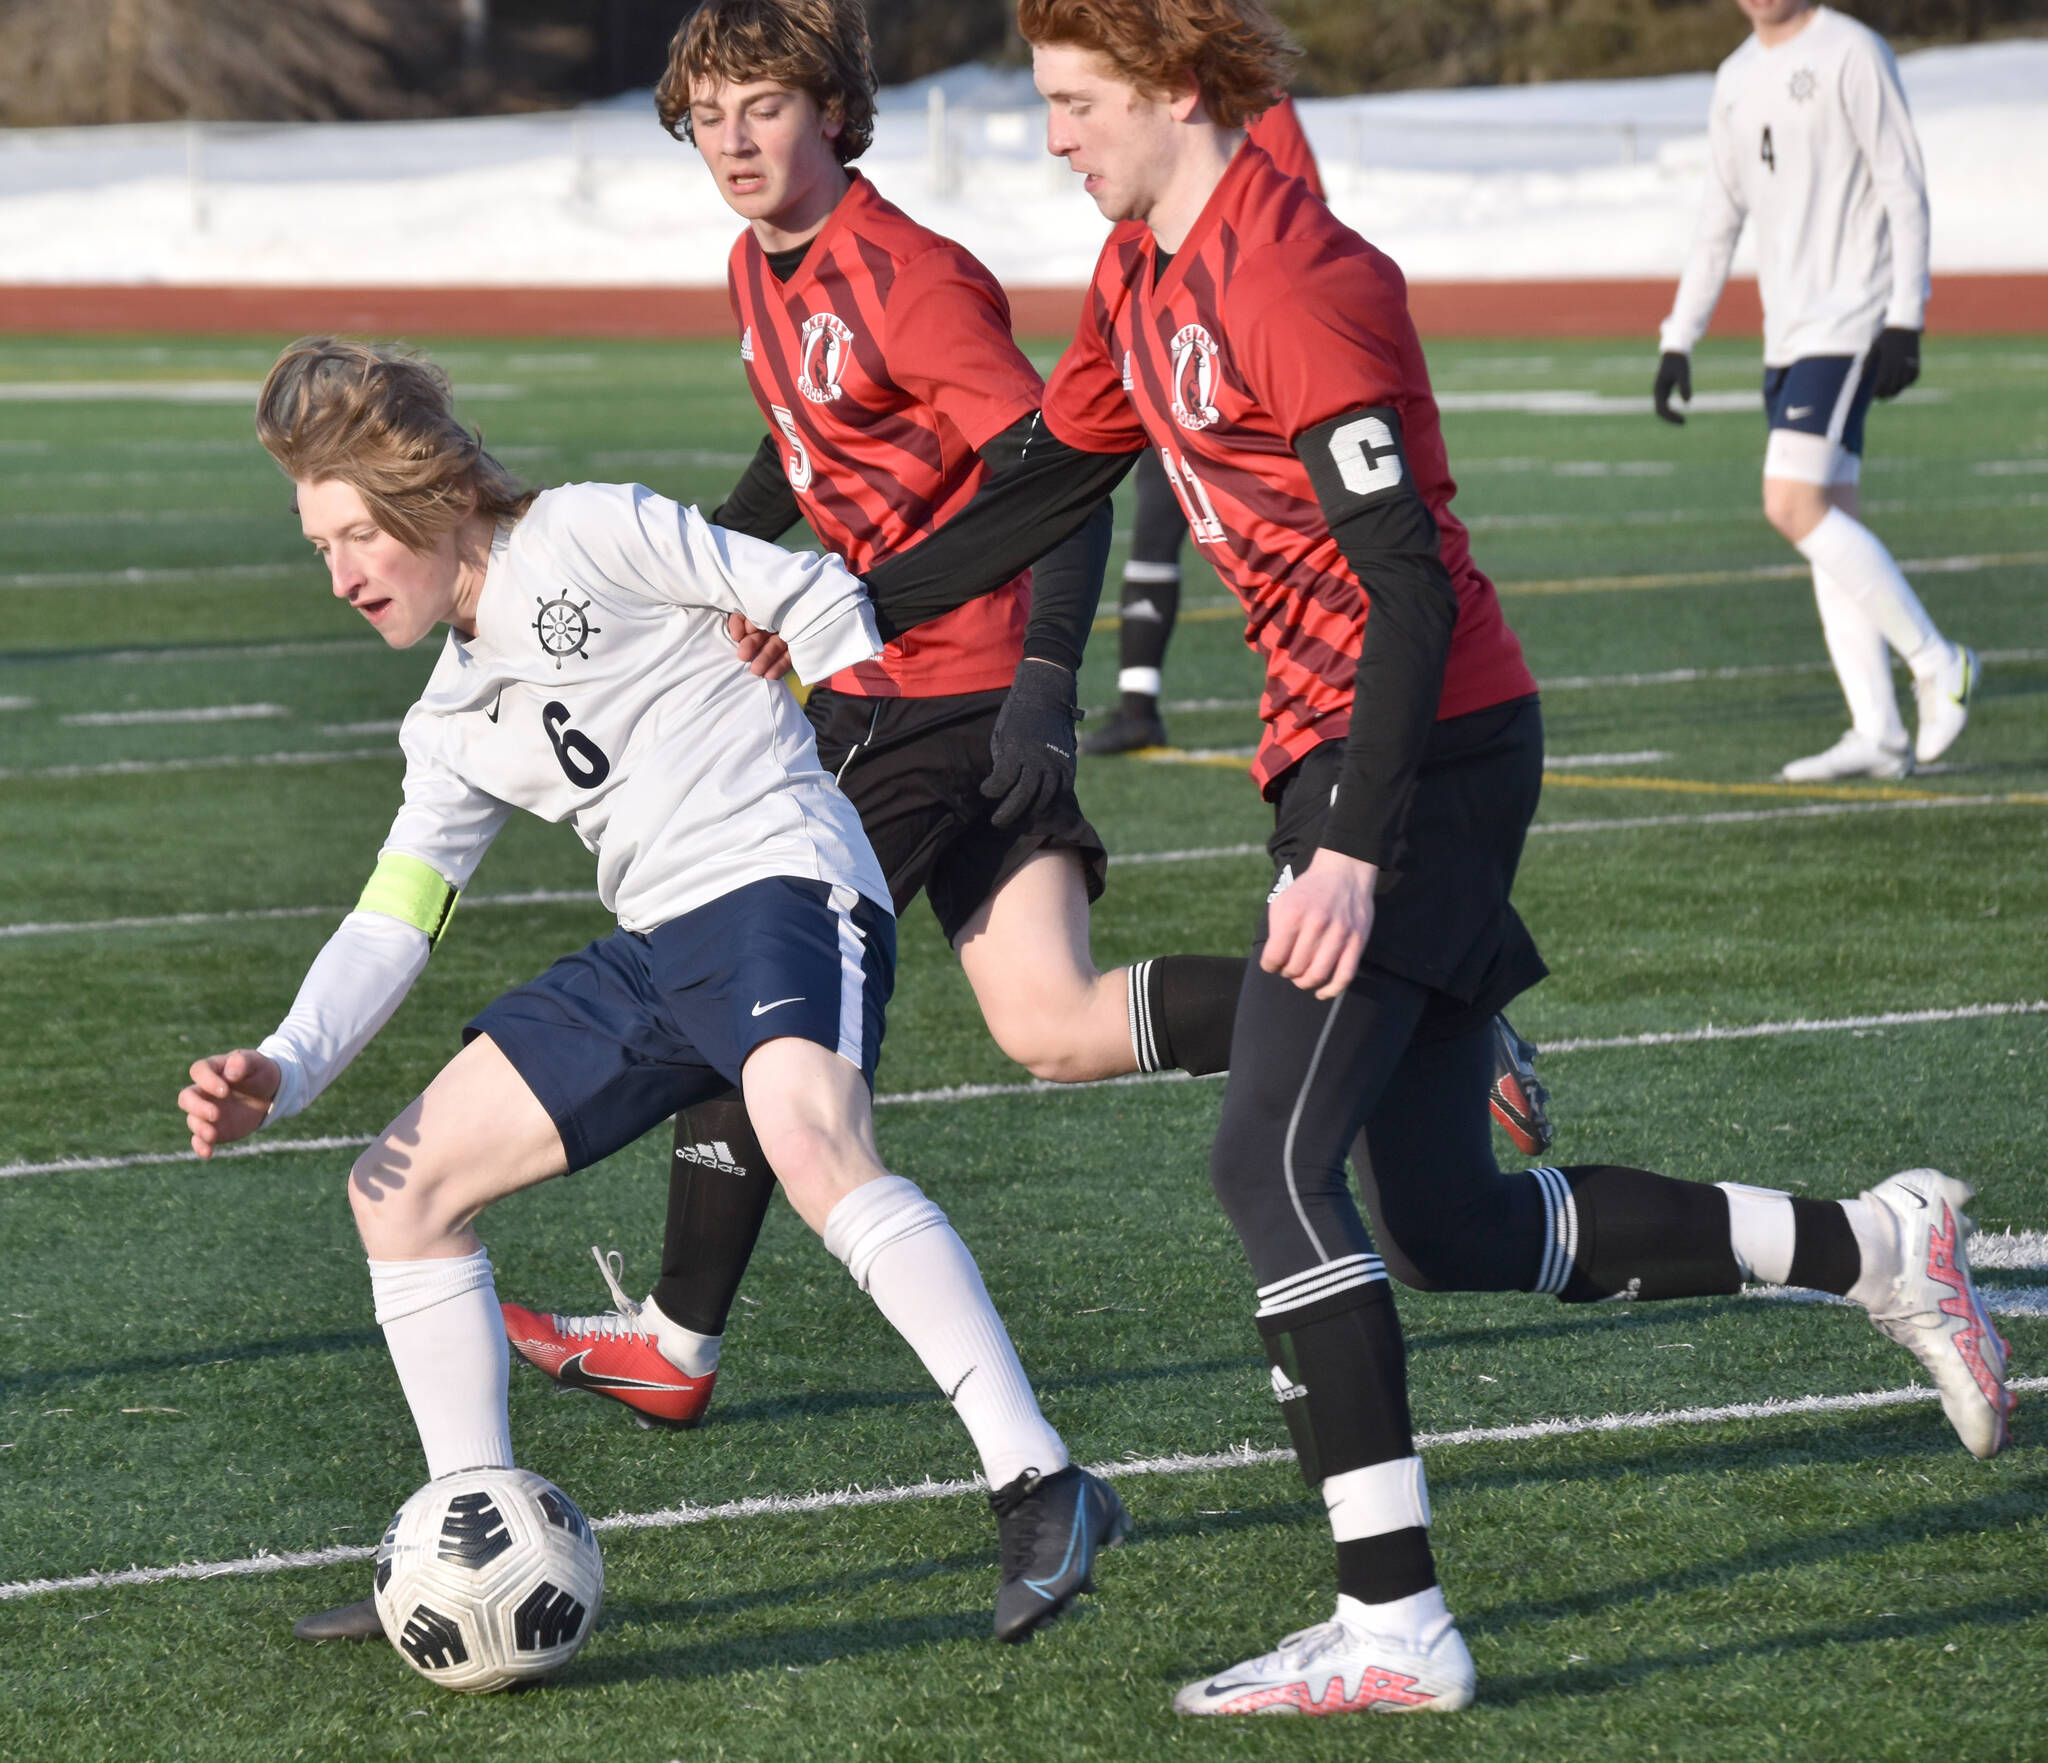 Photo by Jeff Helminiak/Peninsula Clarion
Homer’s Owen Pitzman shields the ball from Kenai Central’s Wade James on April 6 at Ed Hollier Field at Kenai Central High School.